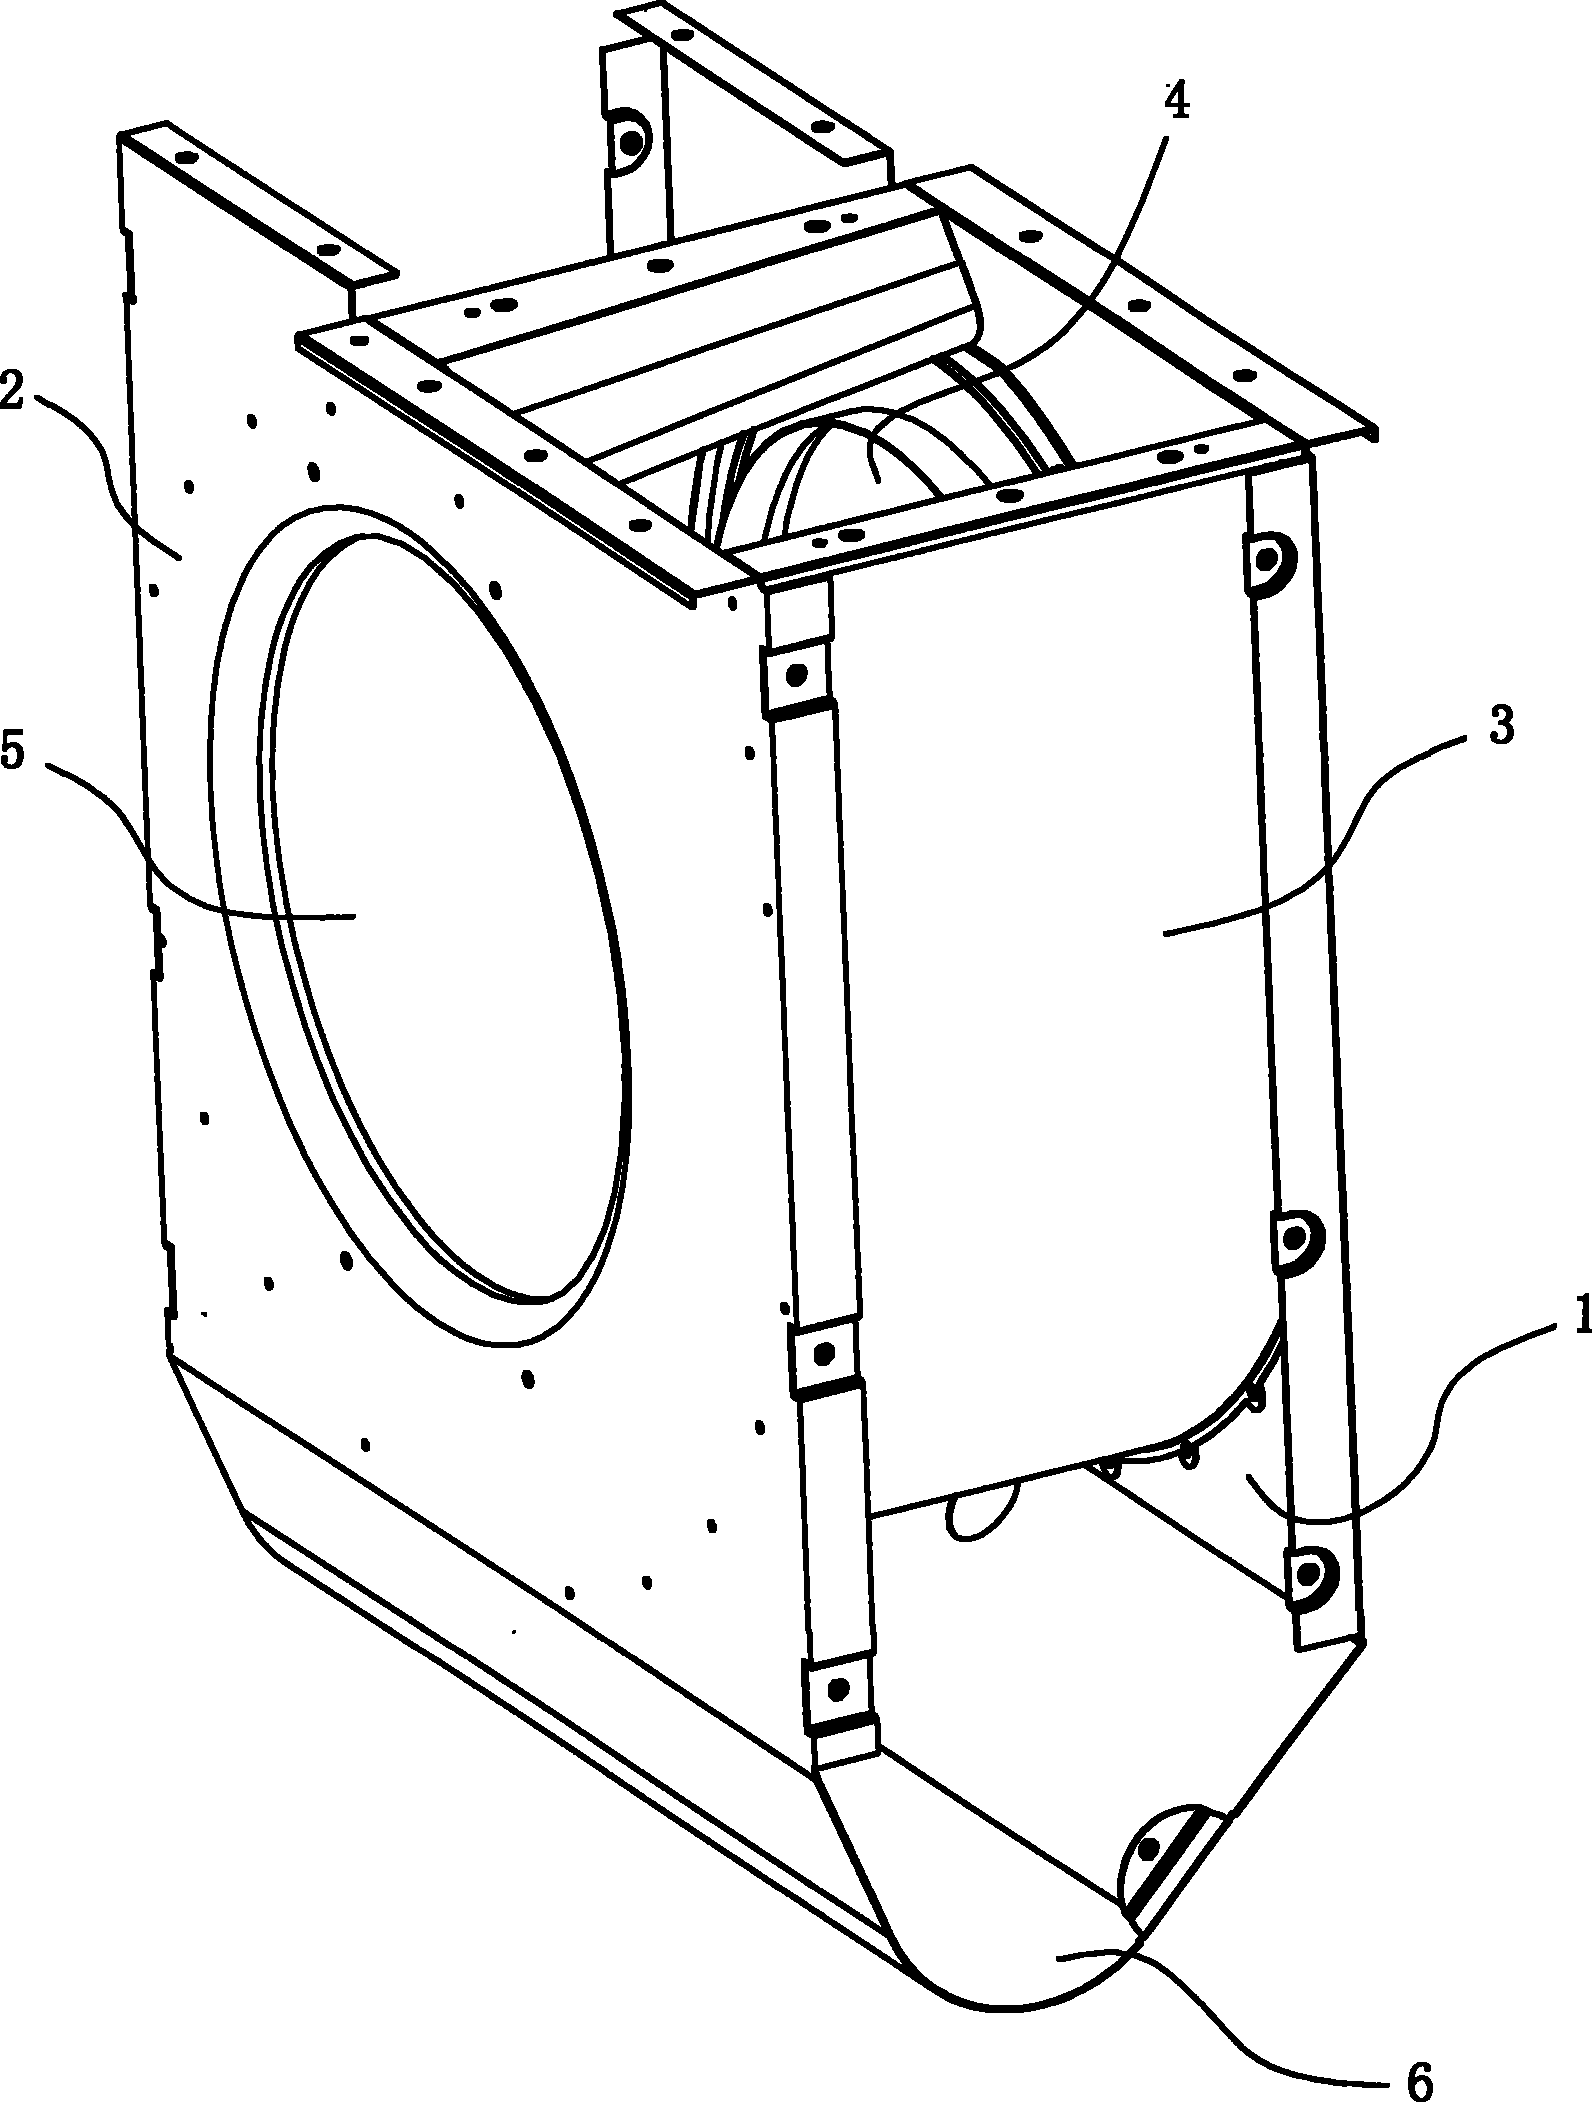 Spiral case of blower fan in apparatus with inlet air from two sides for sucking oil fume